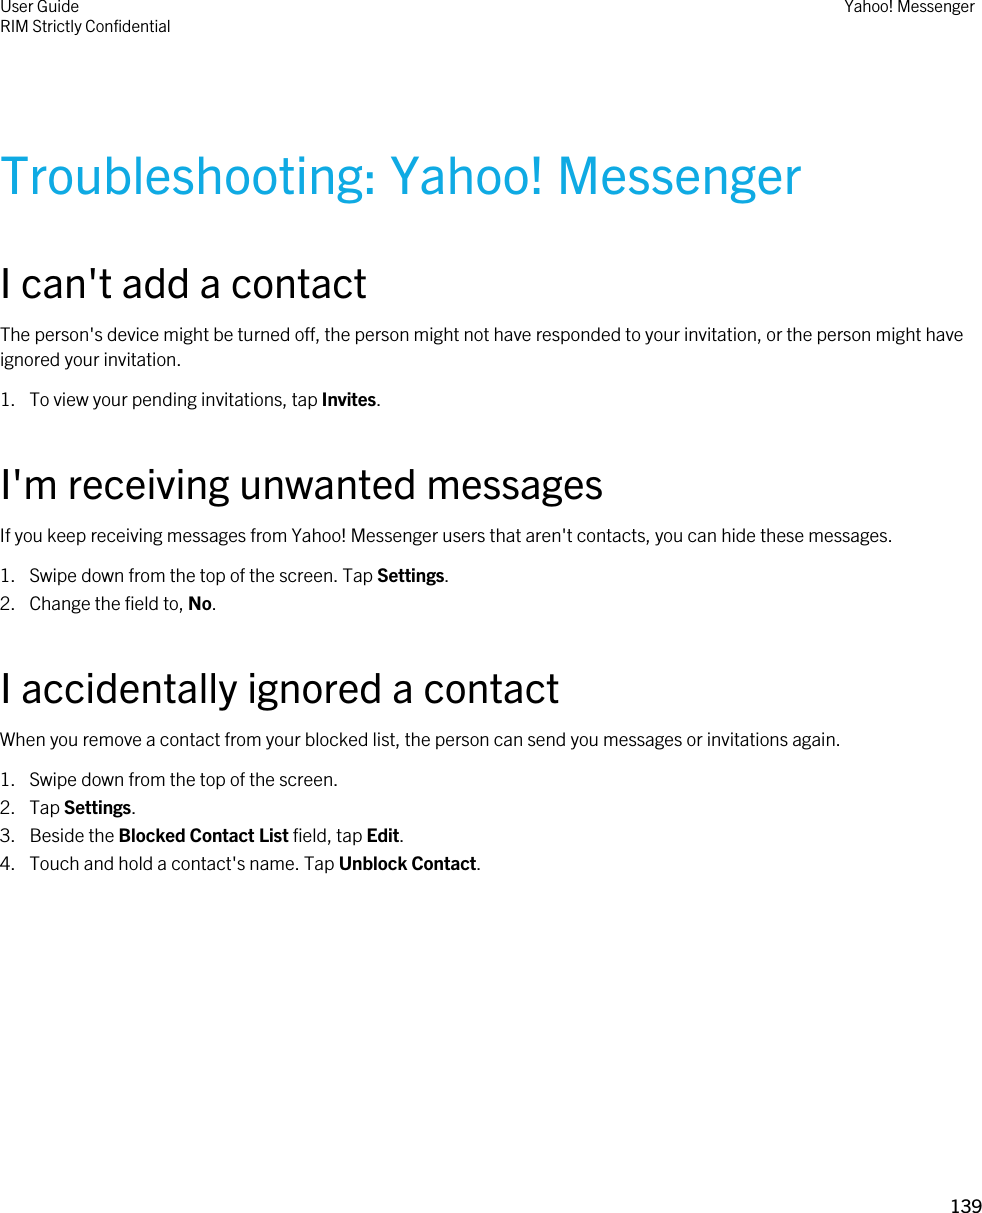 Troubleshooting: Yahoo! MessengerI can&apos;t add a contactThe person&apos;s device might be turned off, the person might not have responded to your invitation, or the person might have ignored your invitation.1. To view your pending invitations, tap Invites.I&apos;m receiving unwanted messagesIf you keep receiving messages from Yahoo! Messenger users that aren&apos;t contacts, you can hide these messages.1. Swipe down from the top of the screen. Tap Settings.2. Change the field to, No.I accidentally ignored a contactWhen you remove a contact from your blocked list, the person can send you messages or invitations again.1. Swipe down from the top of the screen.2. Tap Settings.3. Beside the Blocked Contact List field, tap Edit.4. Touch and hold a contact&apos;s name. Tap Unblock Contact.User GuideRIM Strictly Confidential Yahoo! Messenger139 